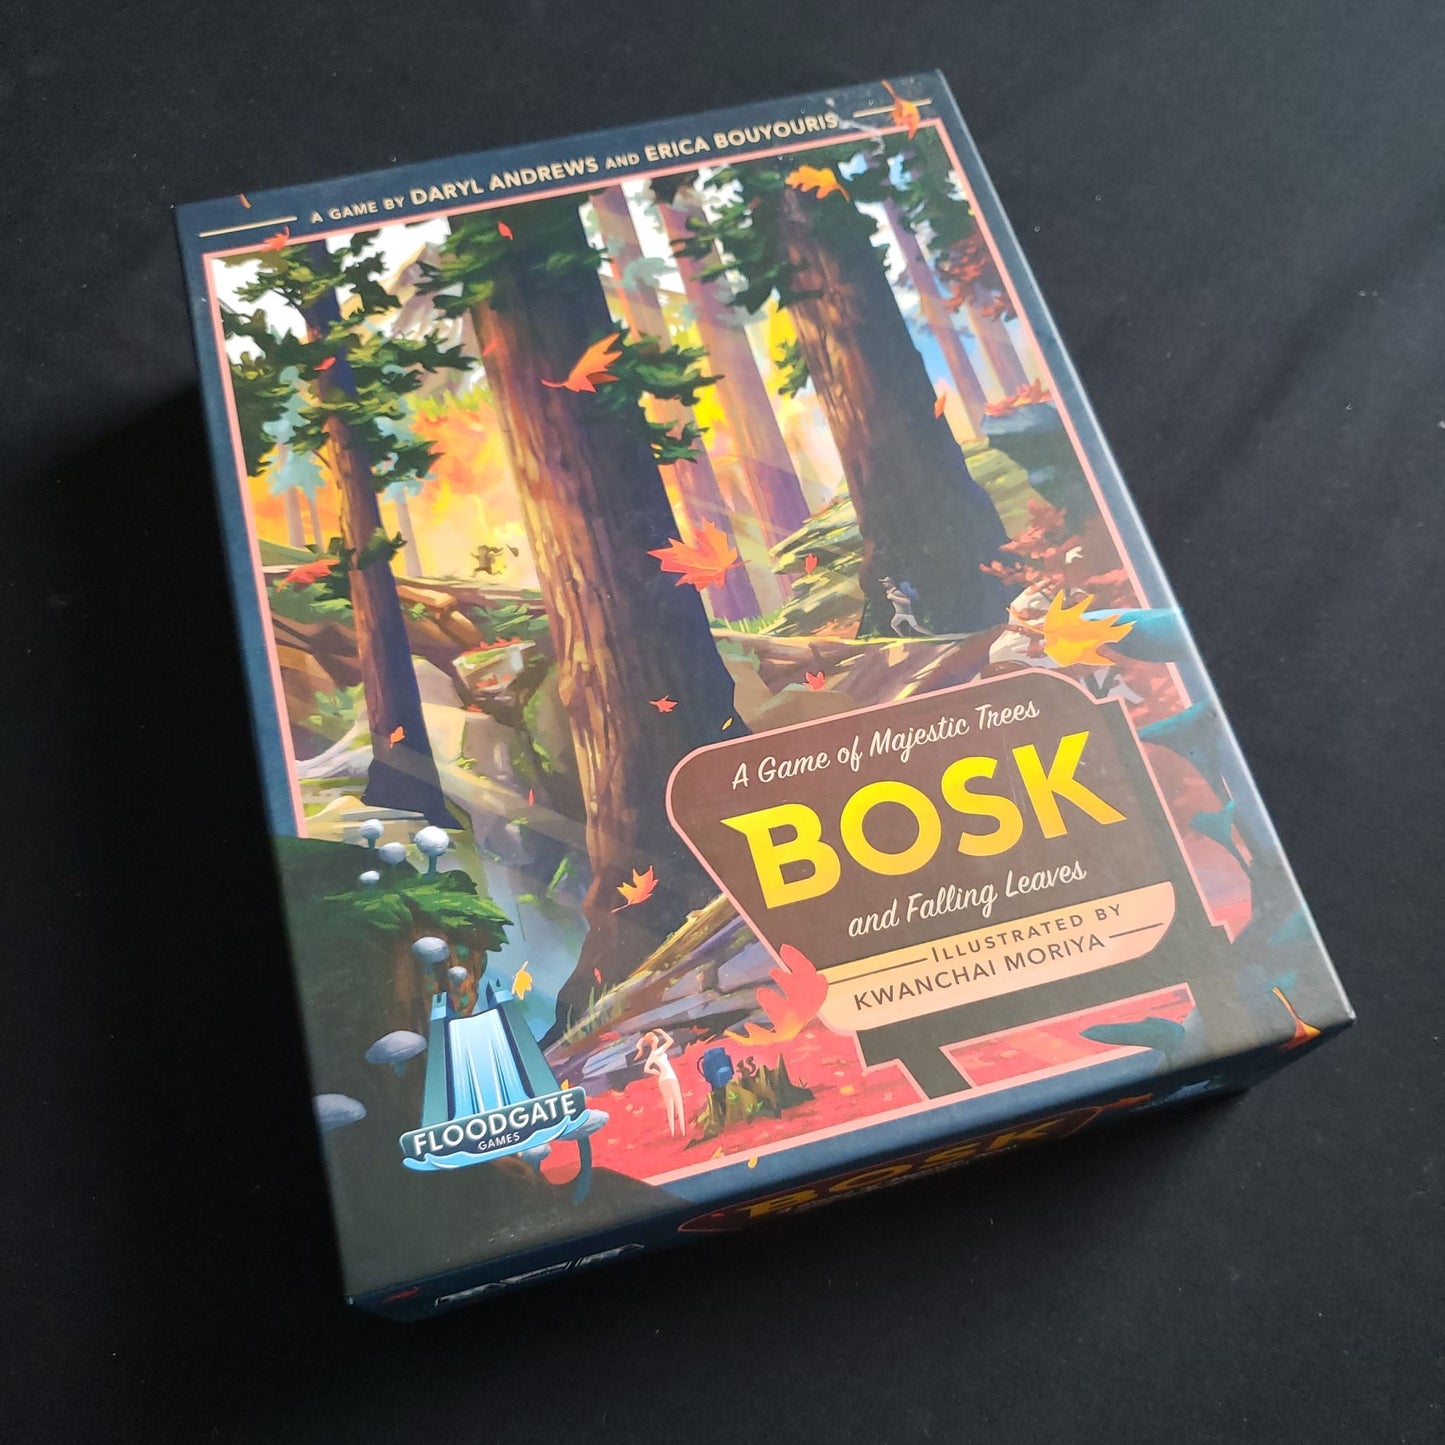 Image shows the front cover of the box of the Bosk board game